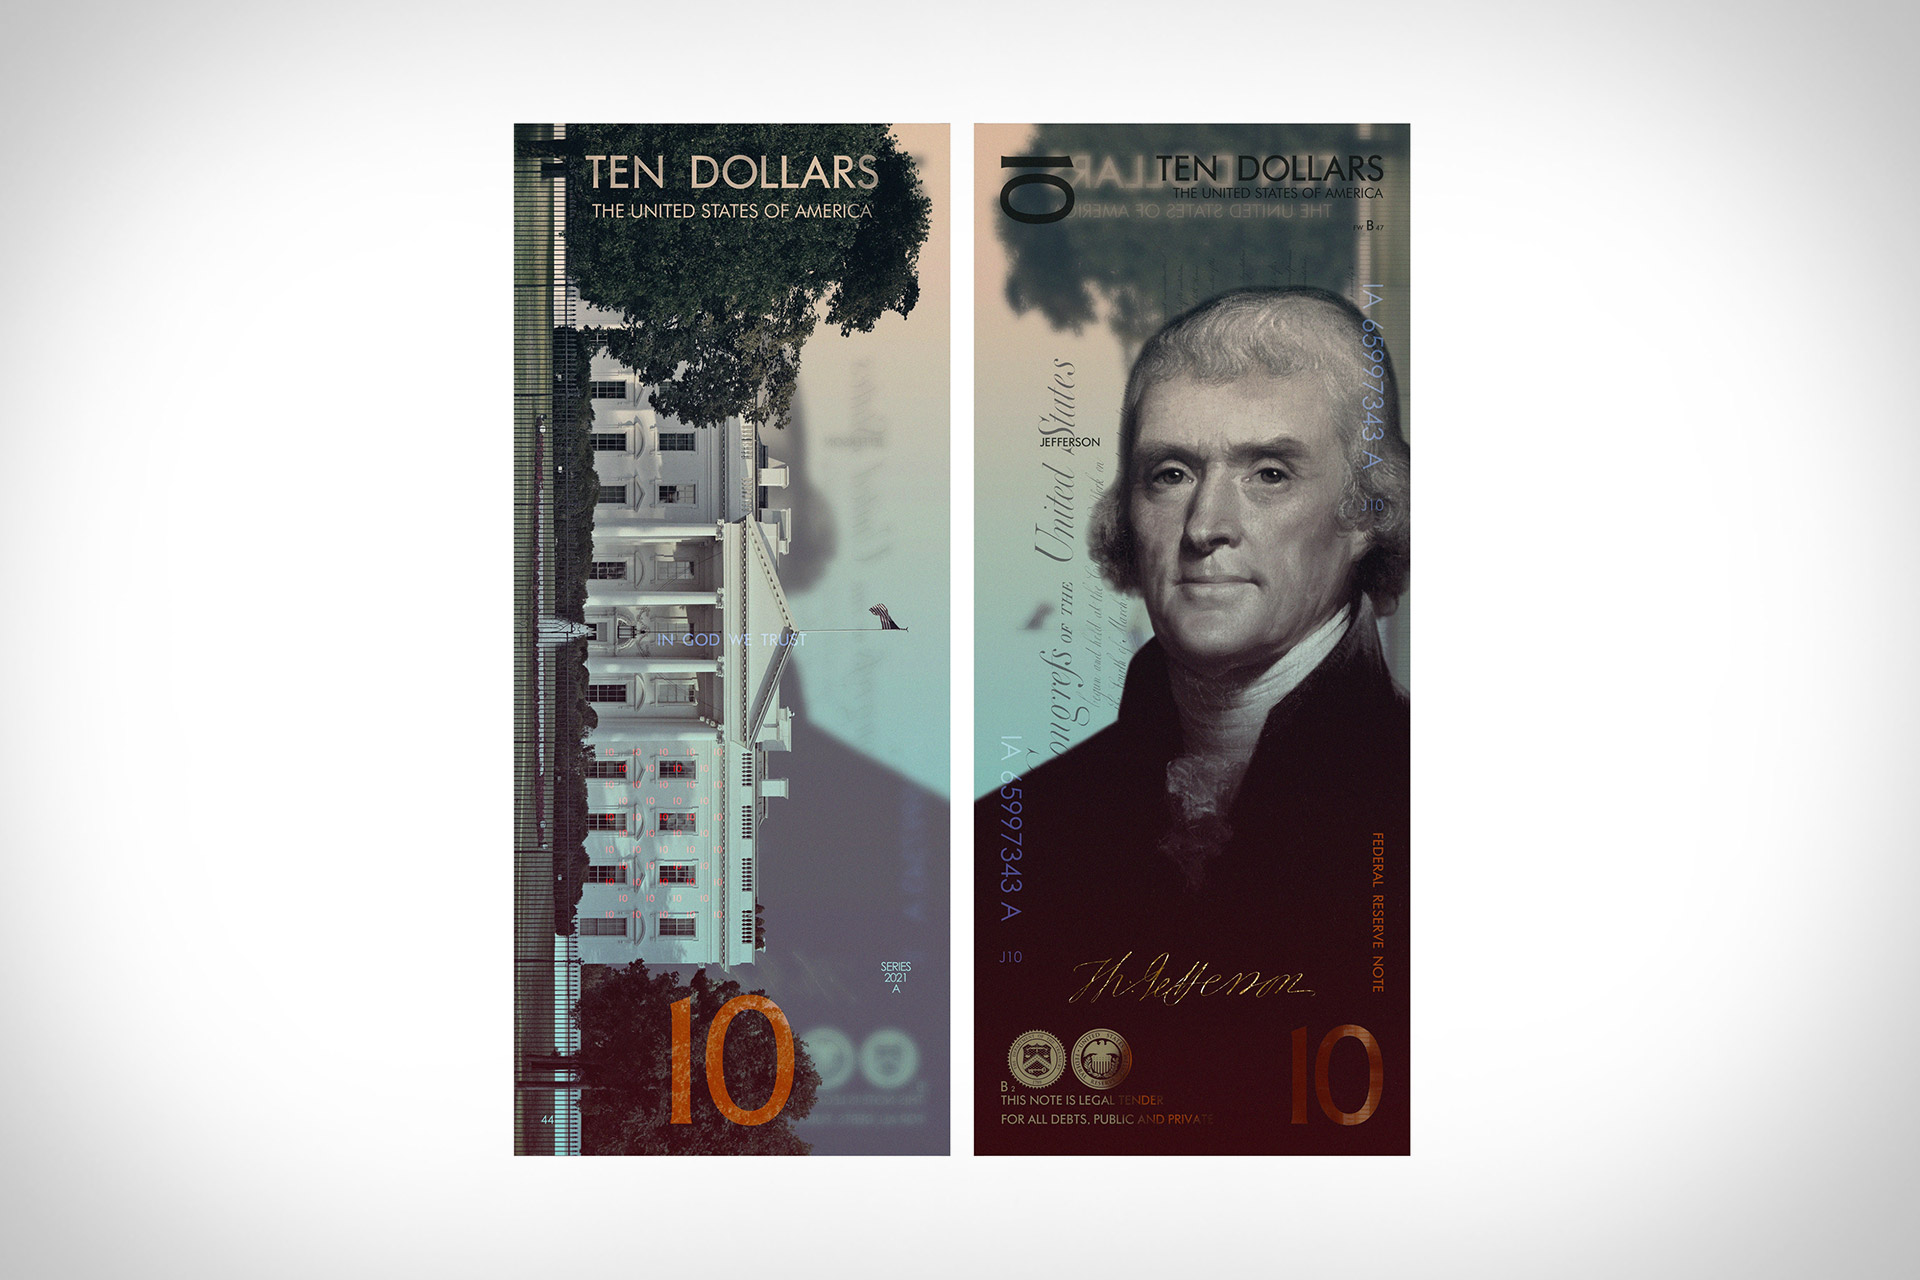 New US currency has been designed by Andrey Avgust